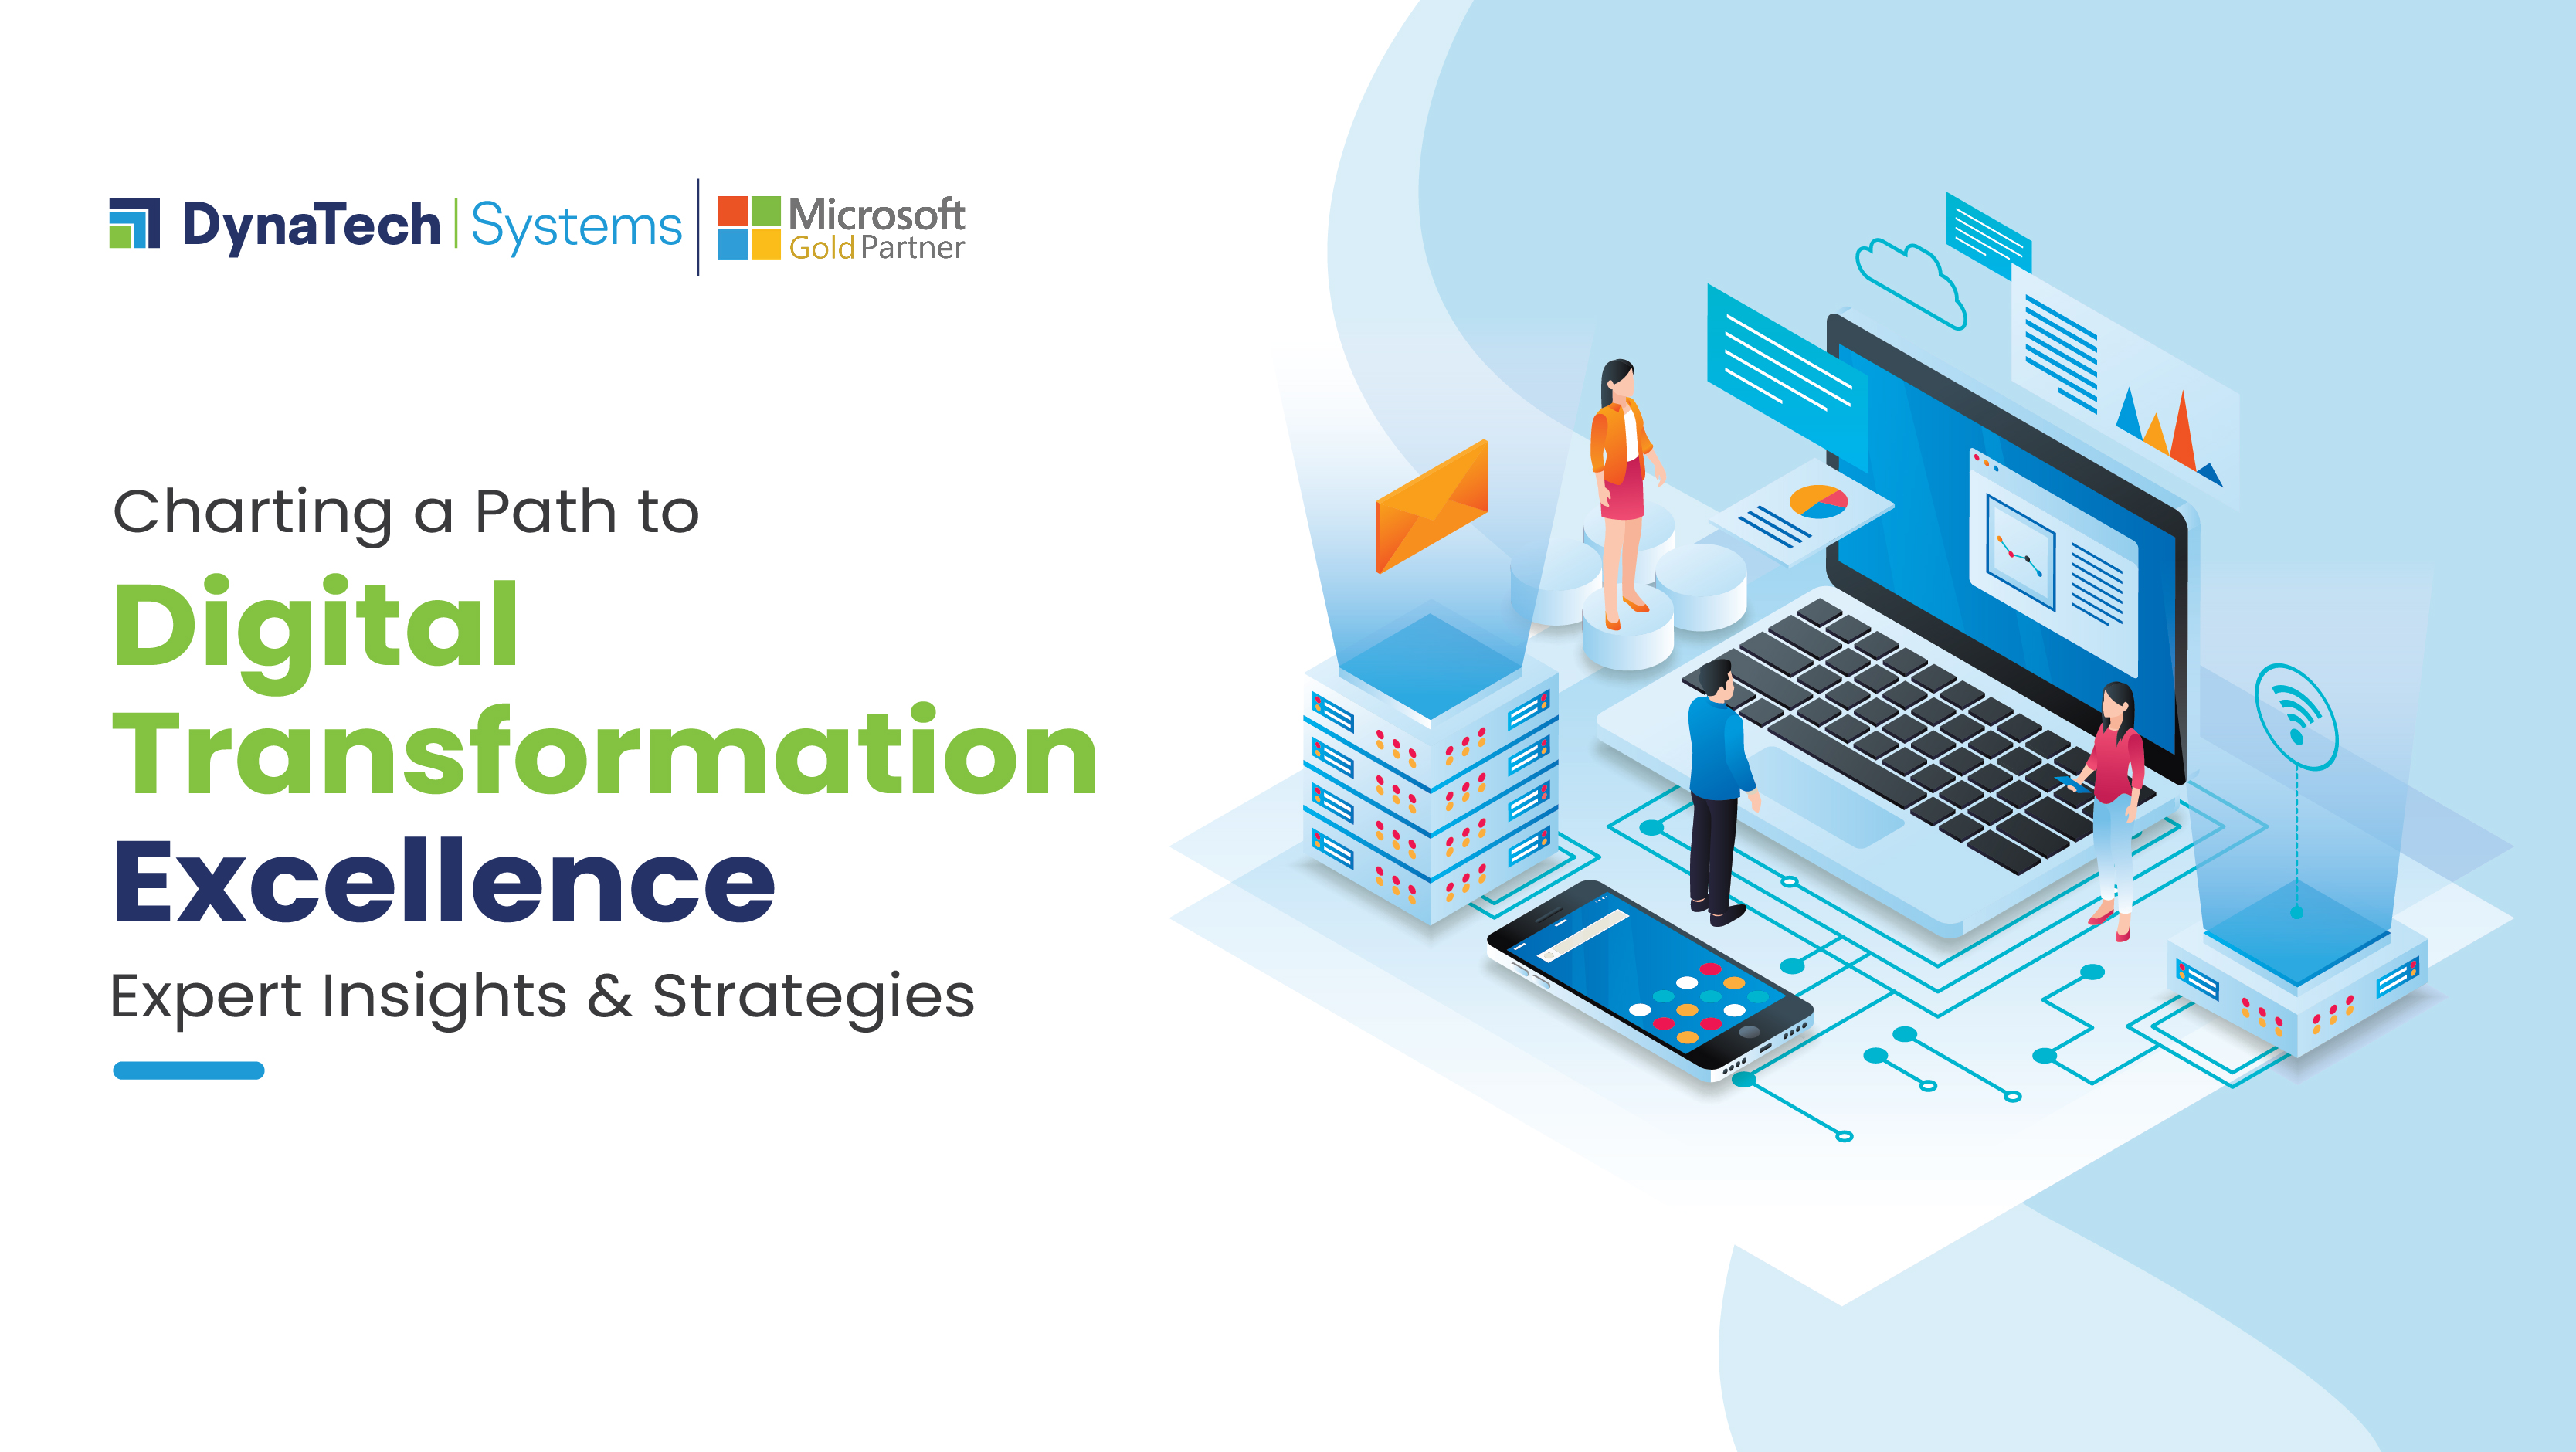 Charting a Path to Digital Transformation Excellence – Expert Insights & Strategies